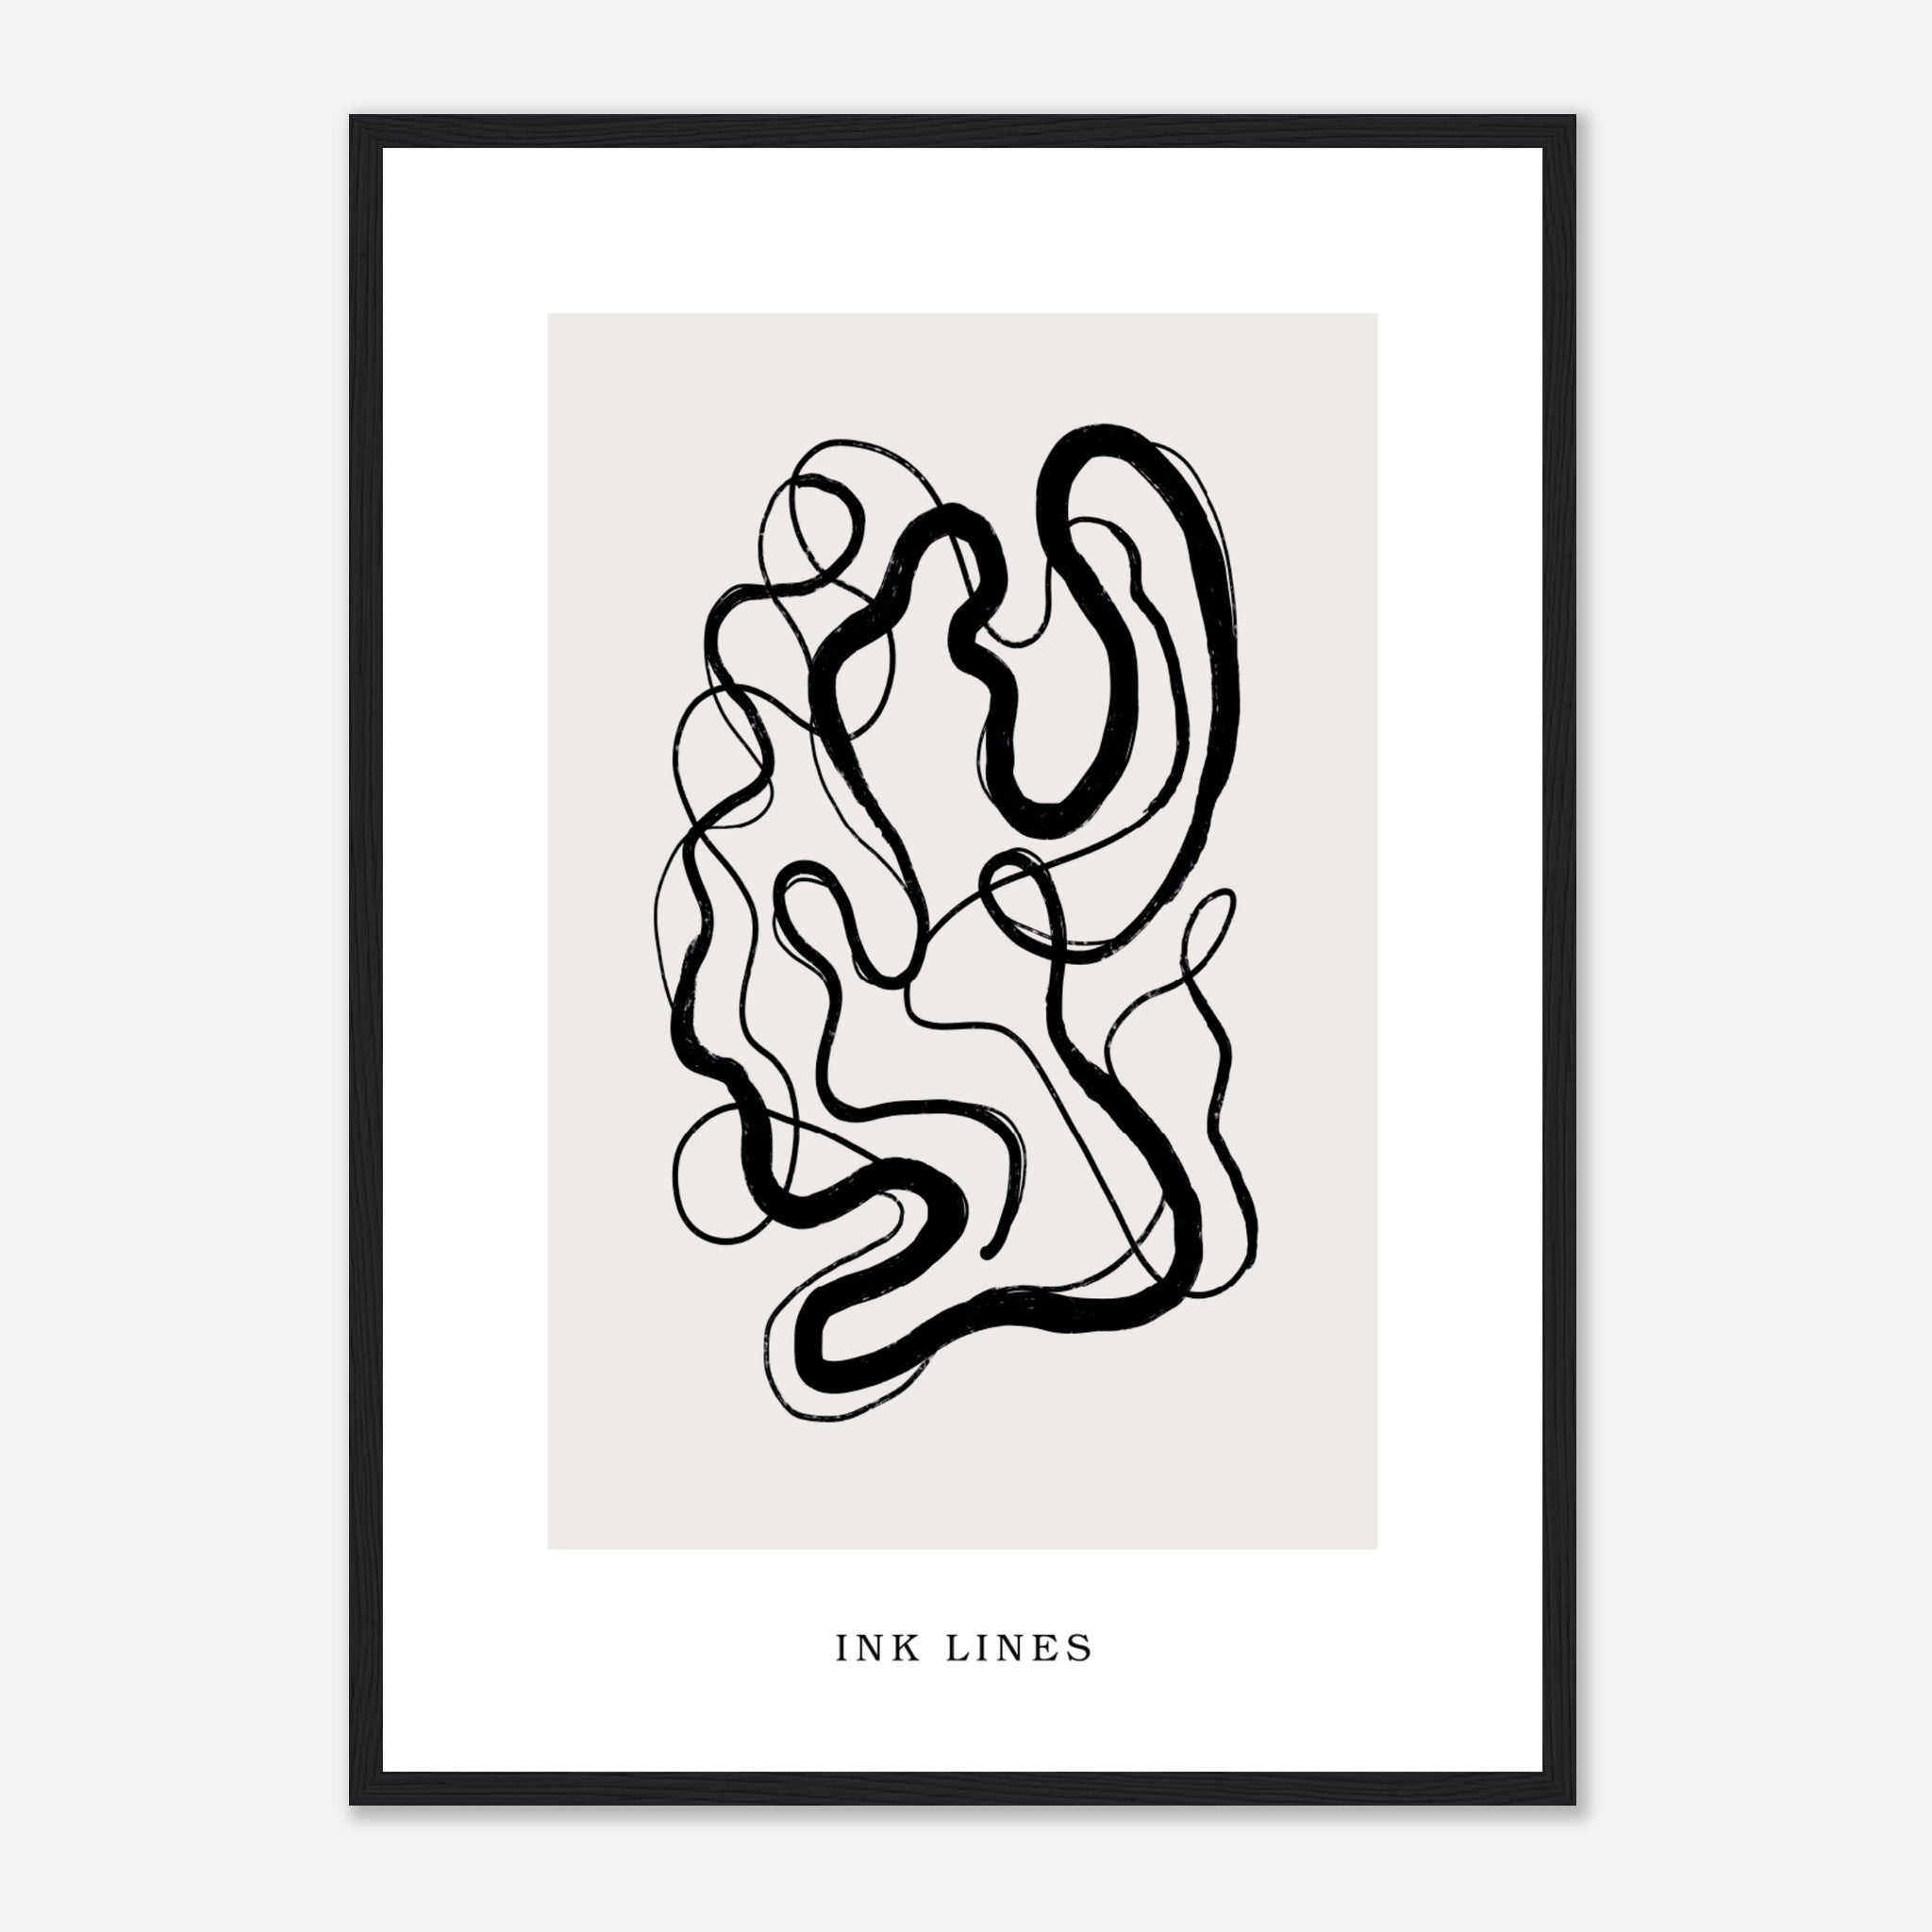 Ink Lines Poster